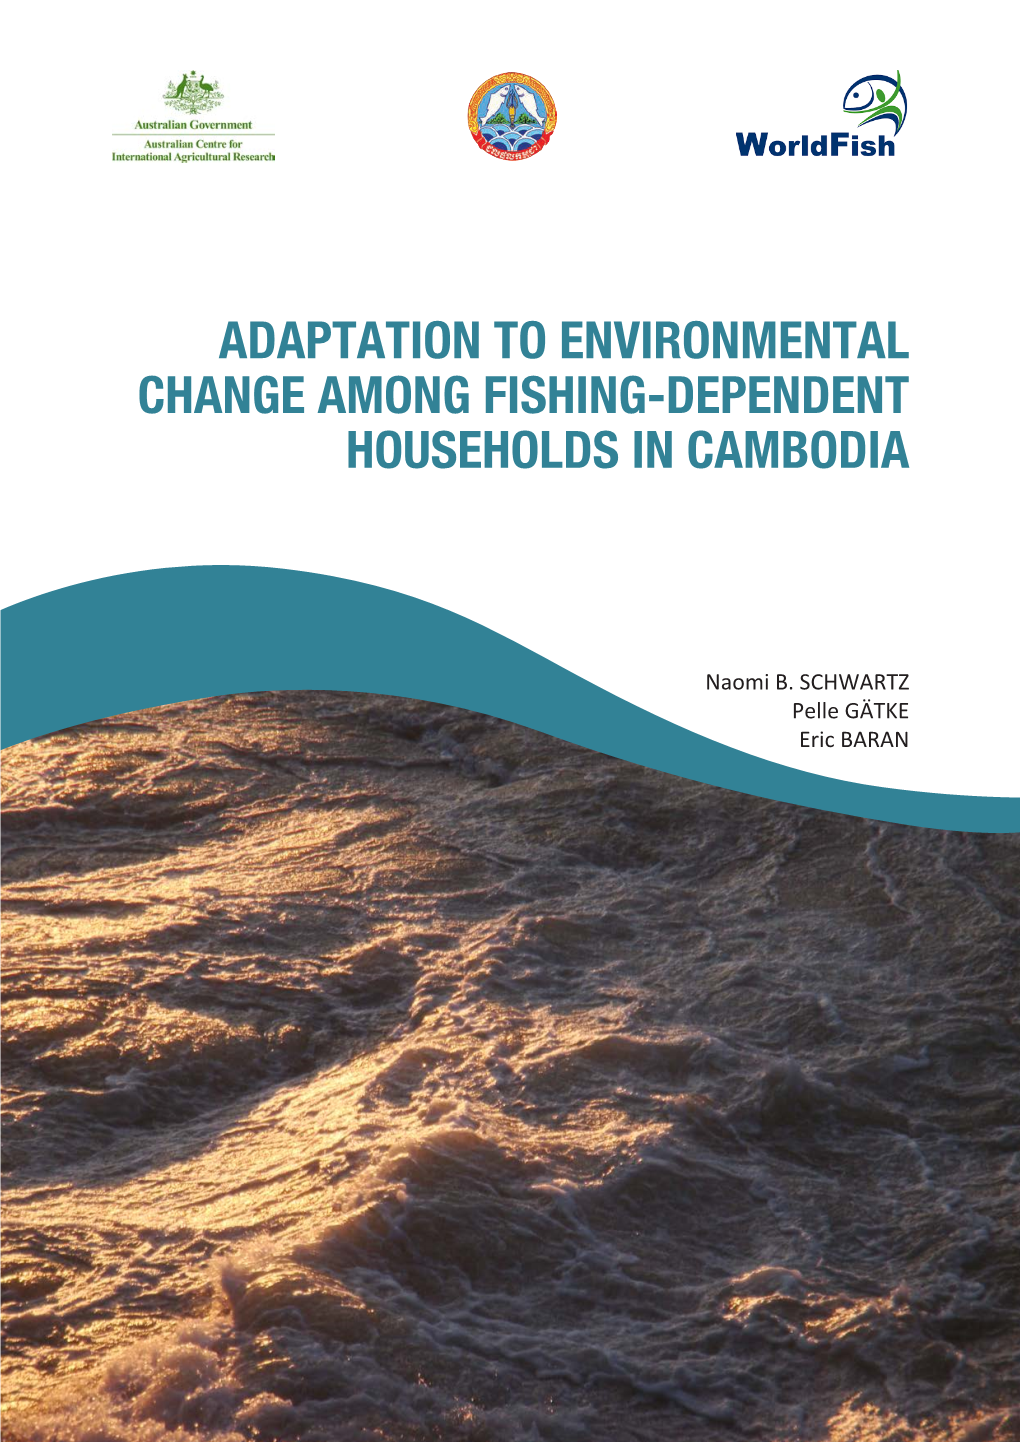 Adaptation to Environmental Change Among Fishing-Dependent Households in Cambodia